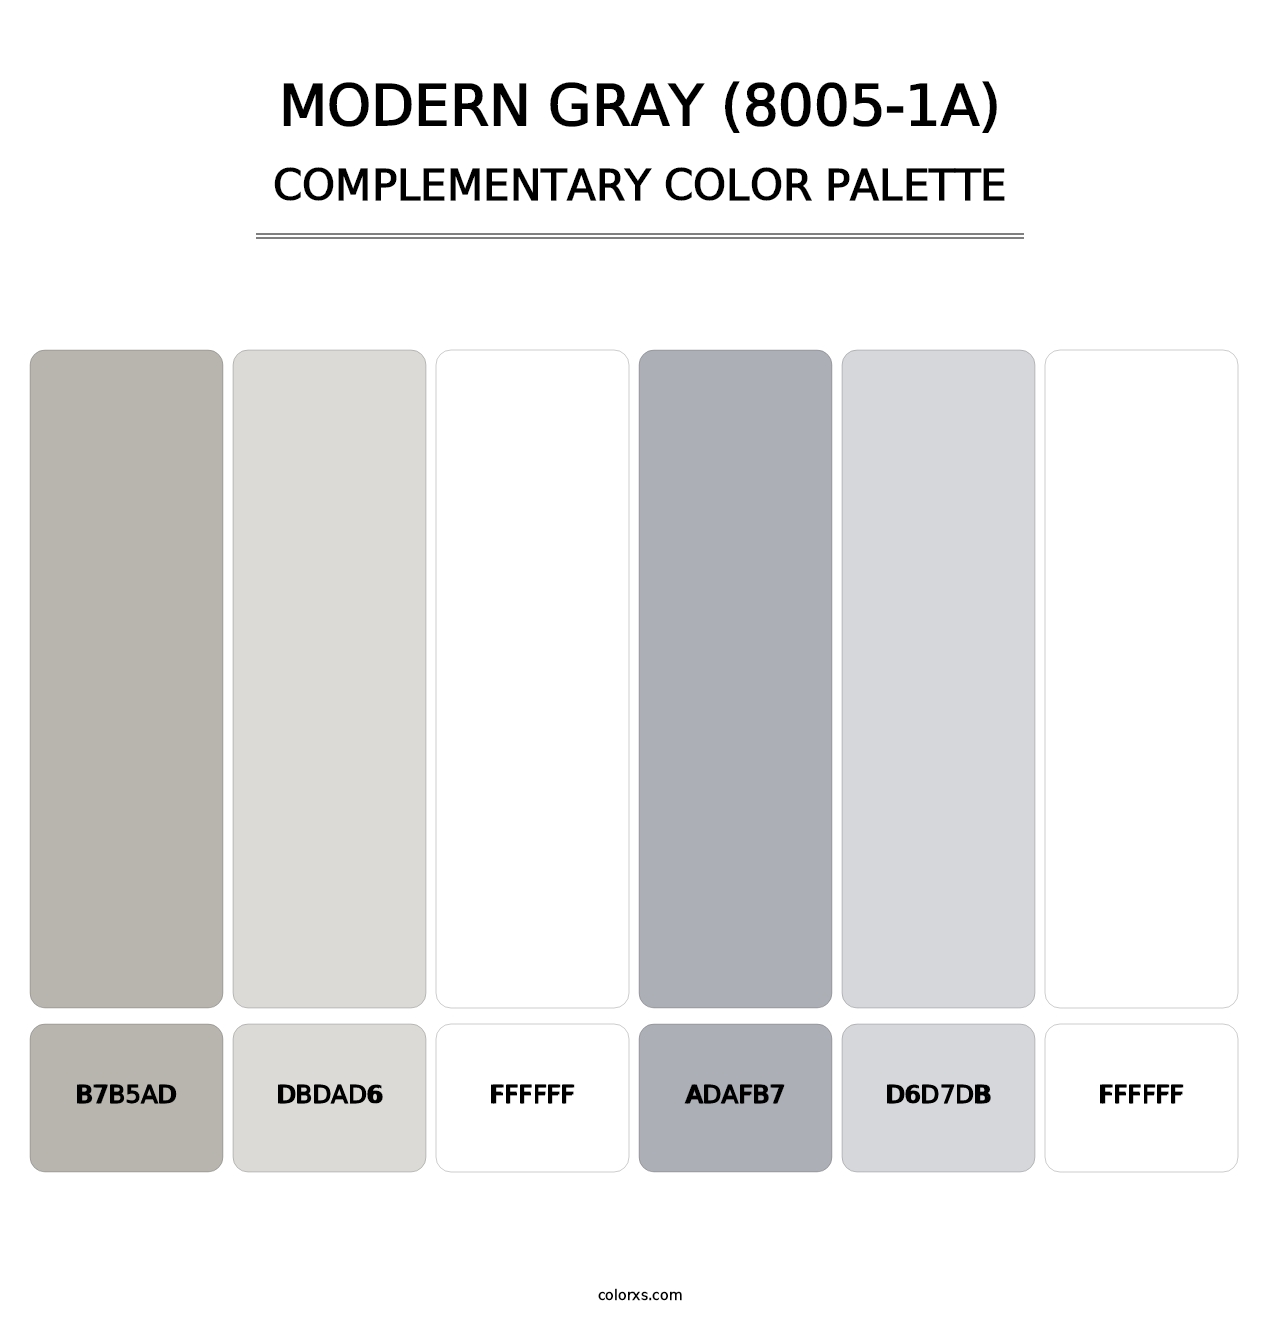 Modern Gray (8005-1A) - Complementary Color Palette